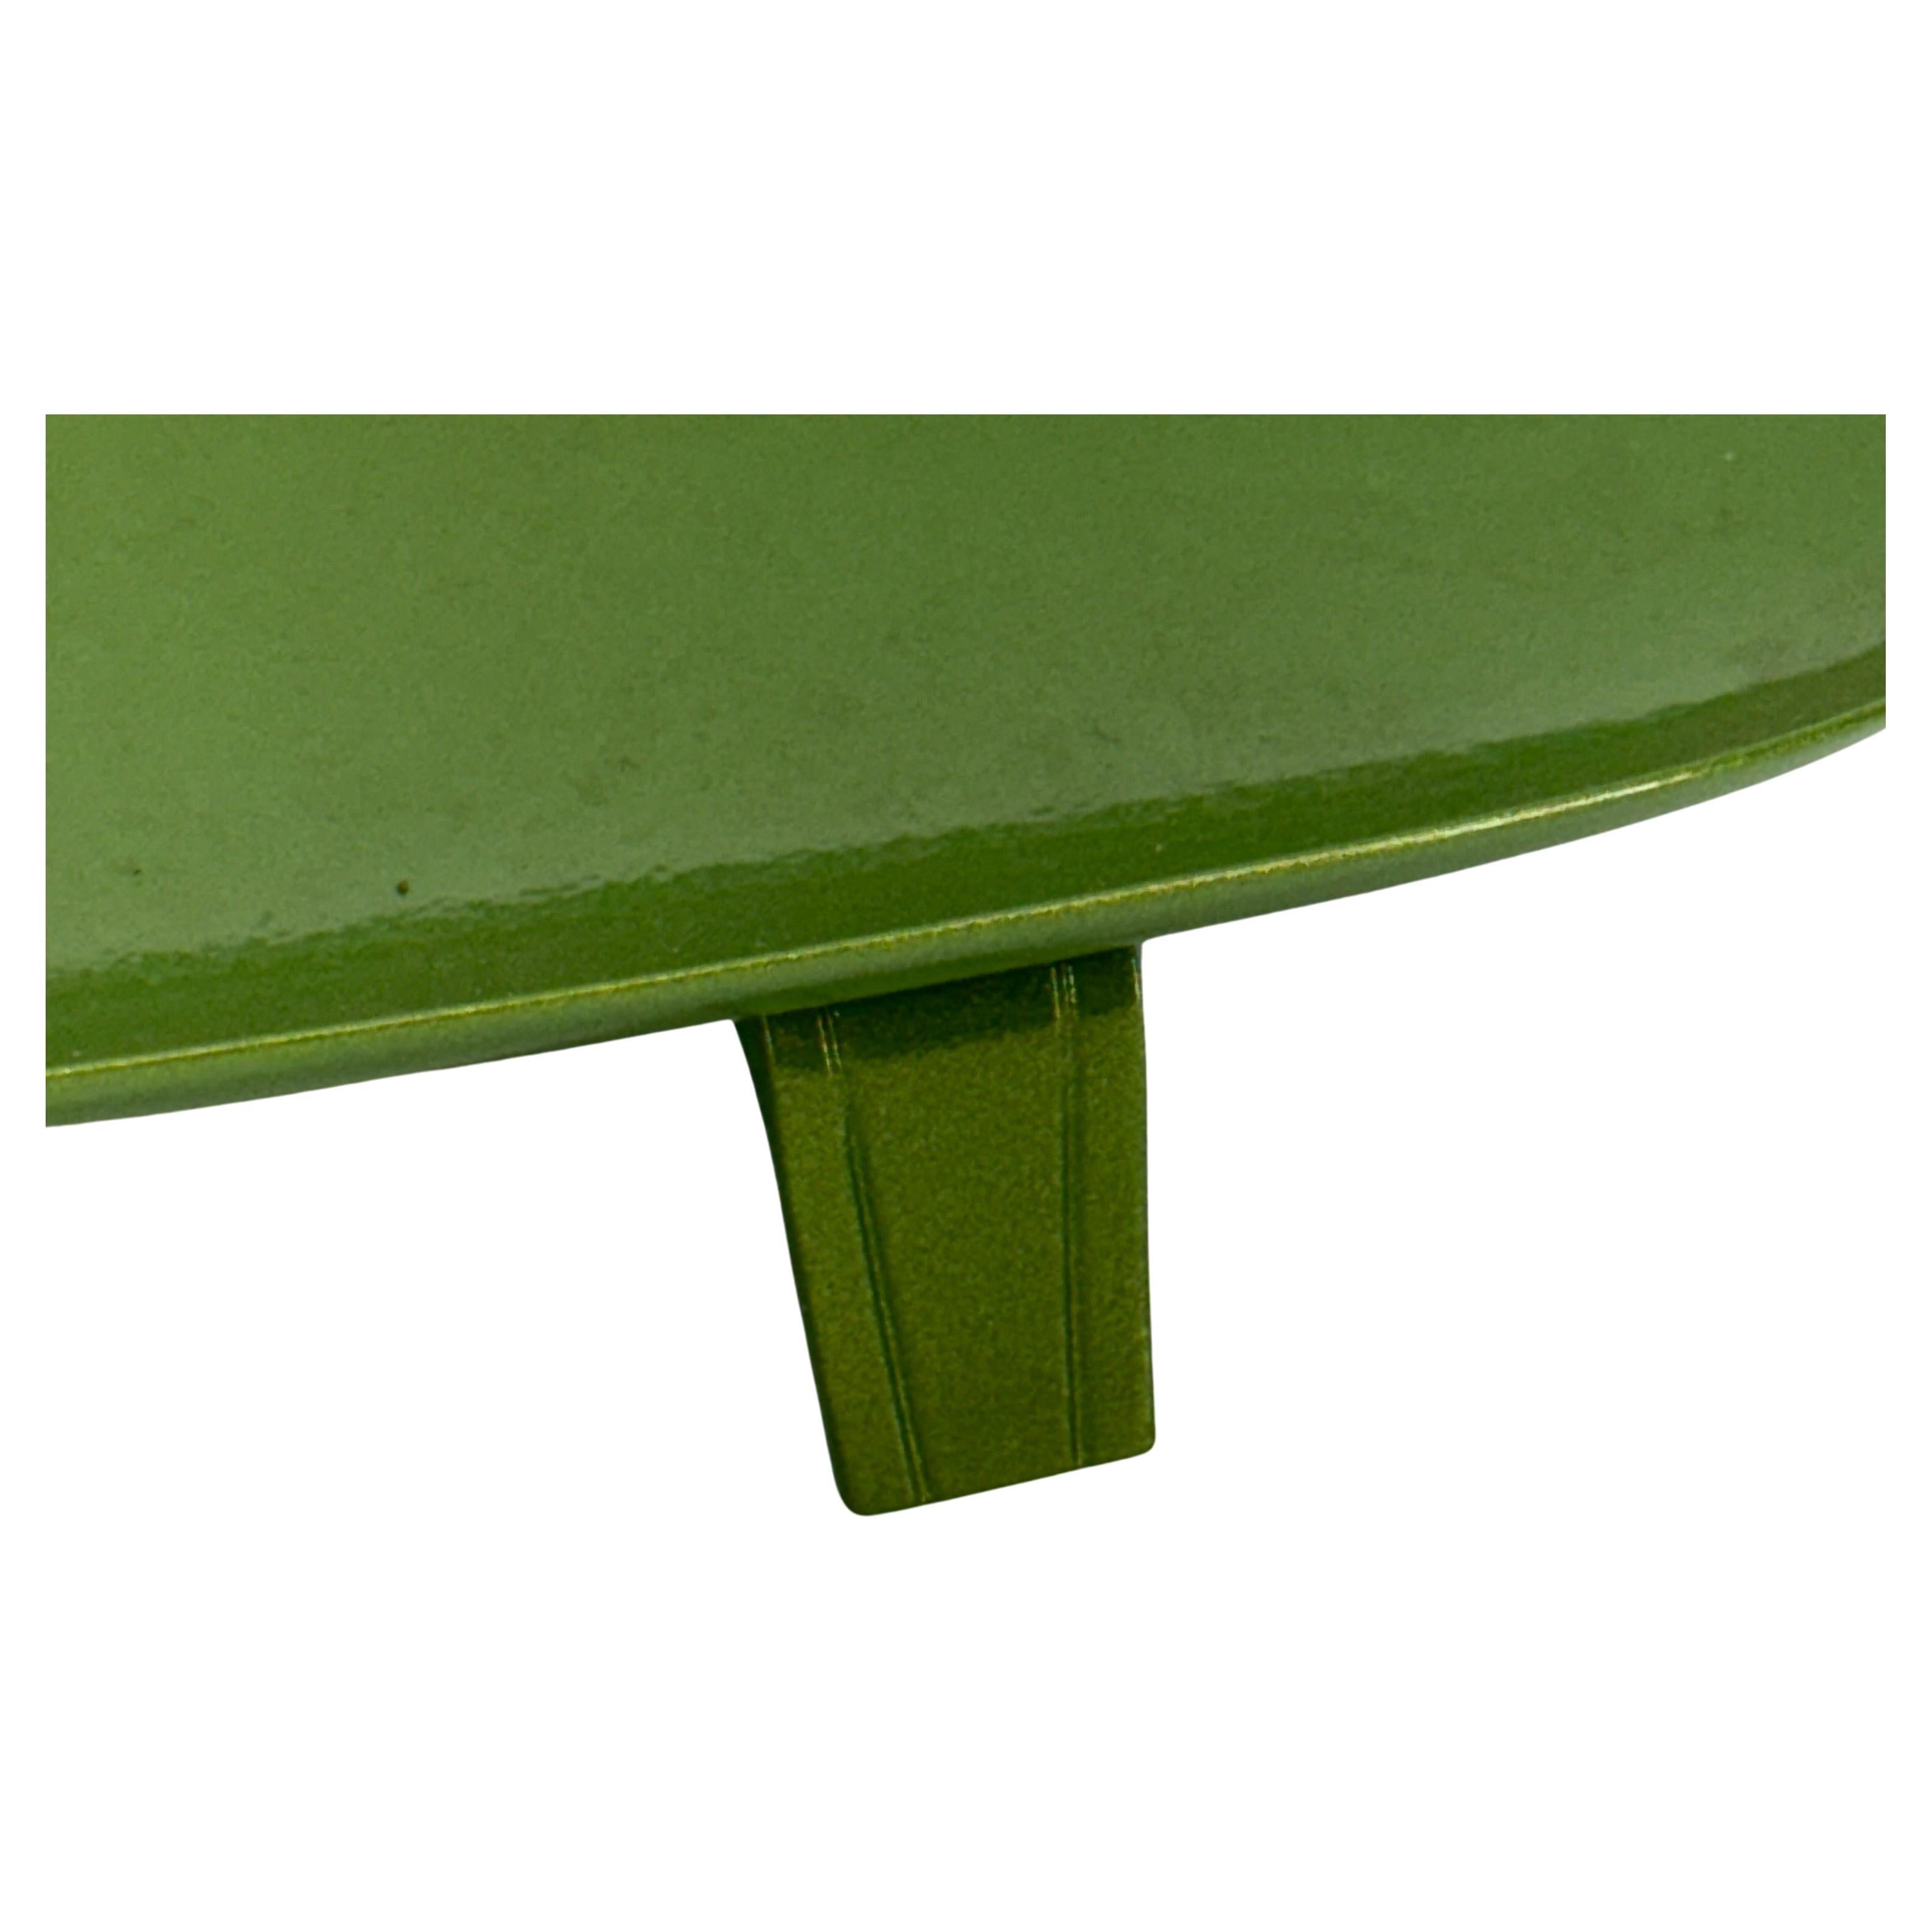 Mid-Century Modern Powder-Coated Leafy Green Metal Tray or Dish In Good Condition For Sale In Haddonfield, NJ